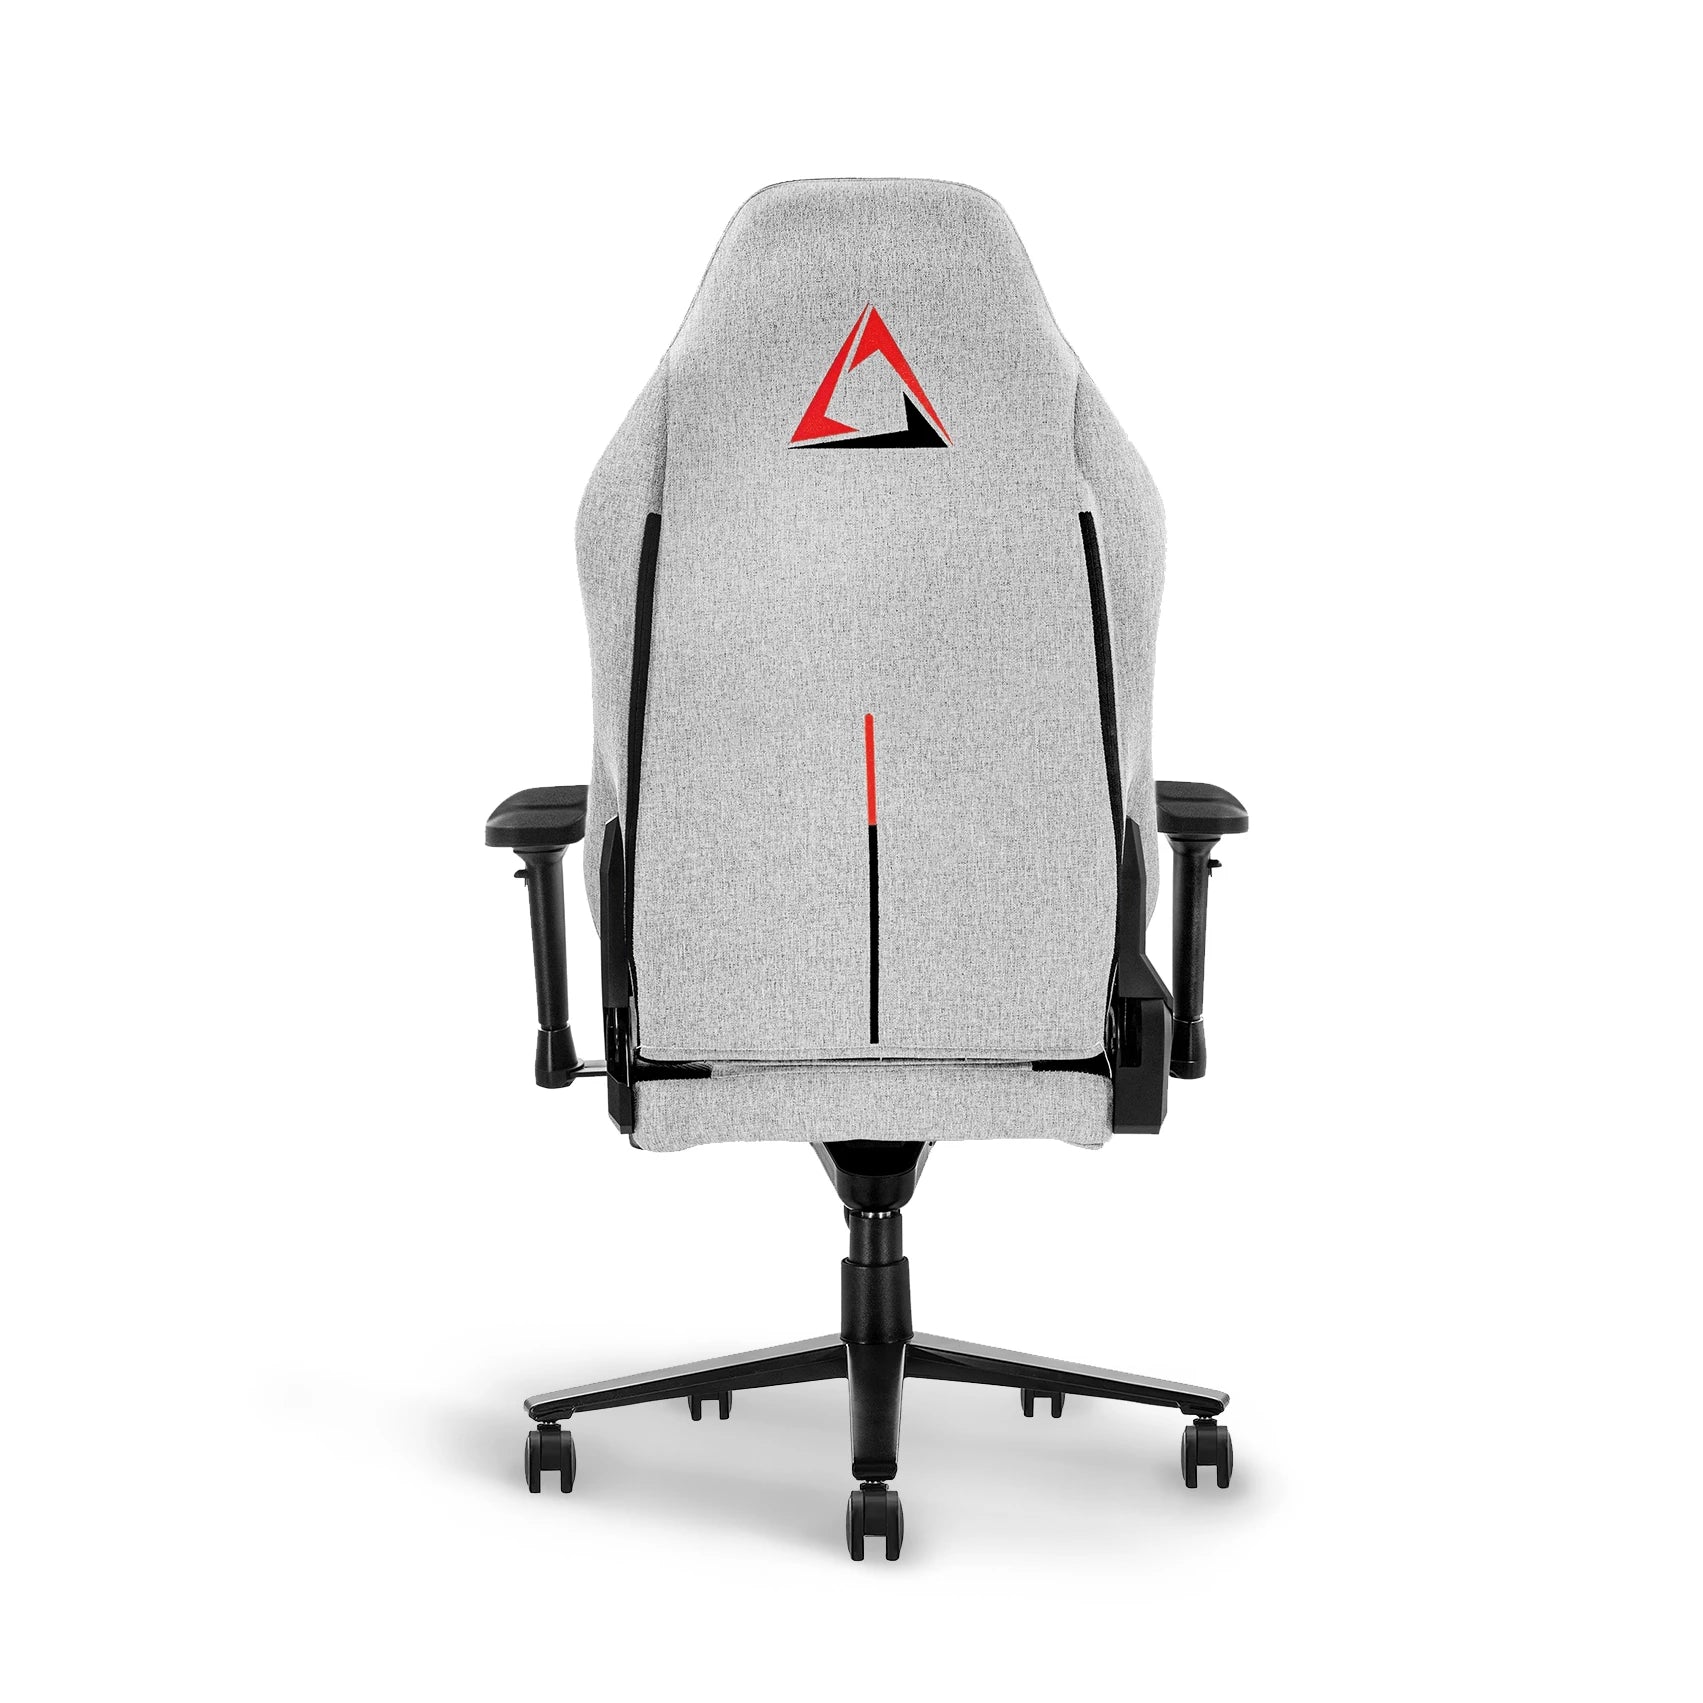 Back view of Greige Grey gaming chair with distinctive red accent and brand emblem.